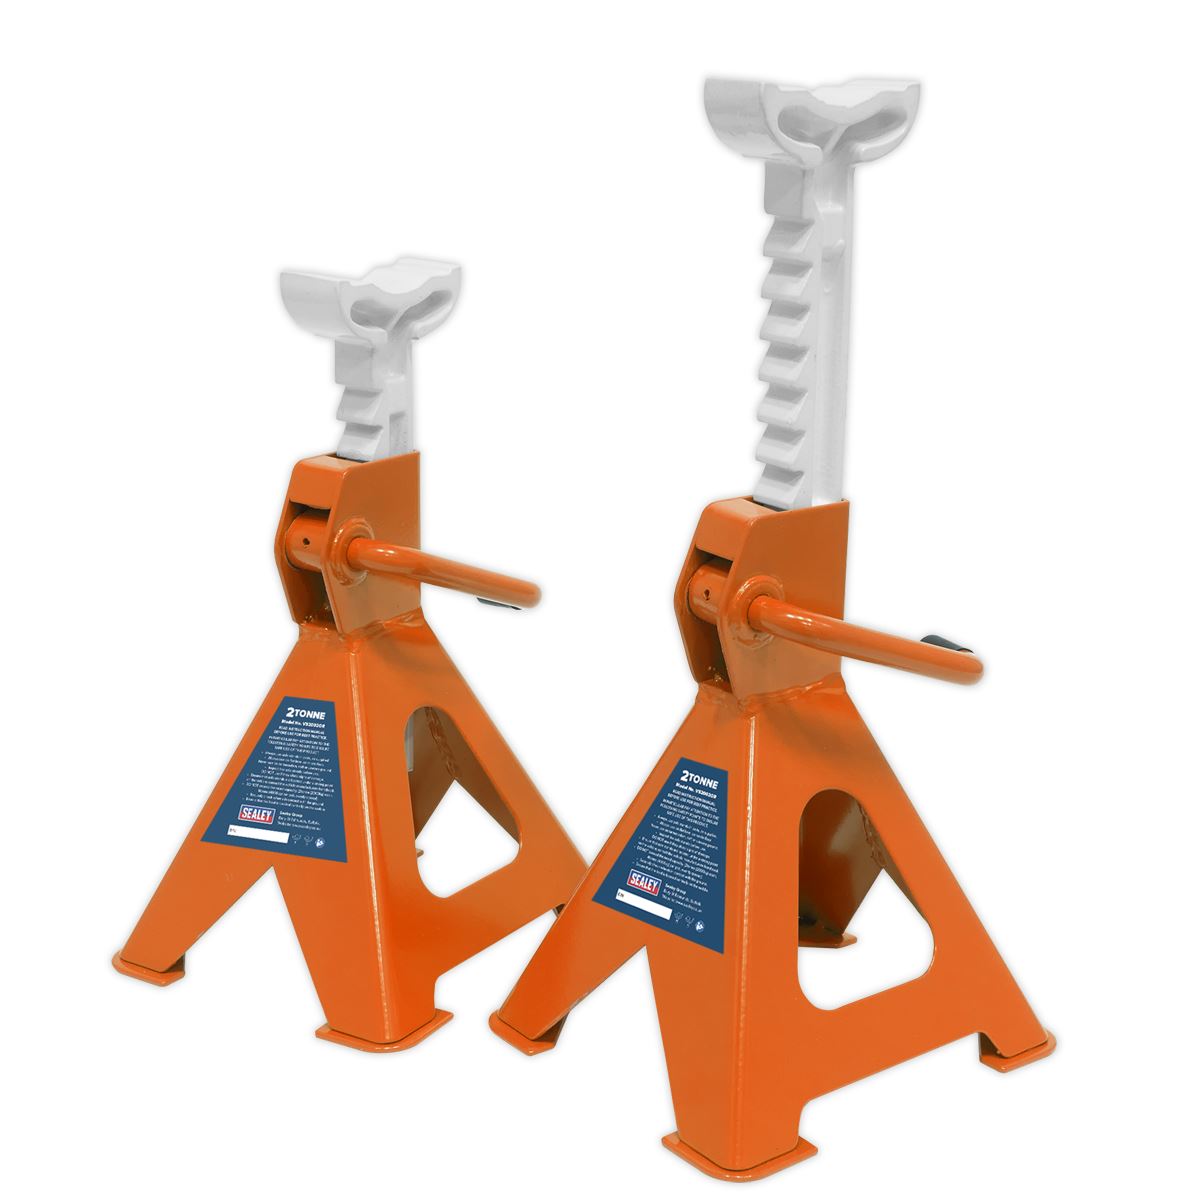 Sealey Ratchet Type Axle Stands (Pair) 2 Tonne Capacity per Stand - Orange